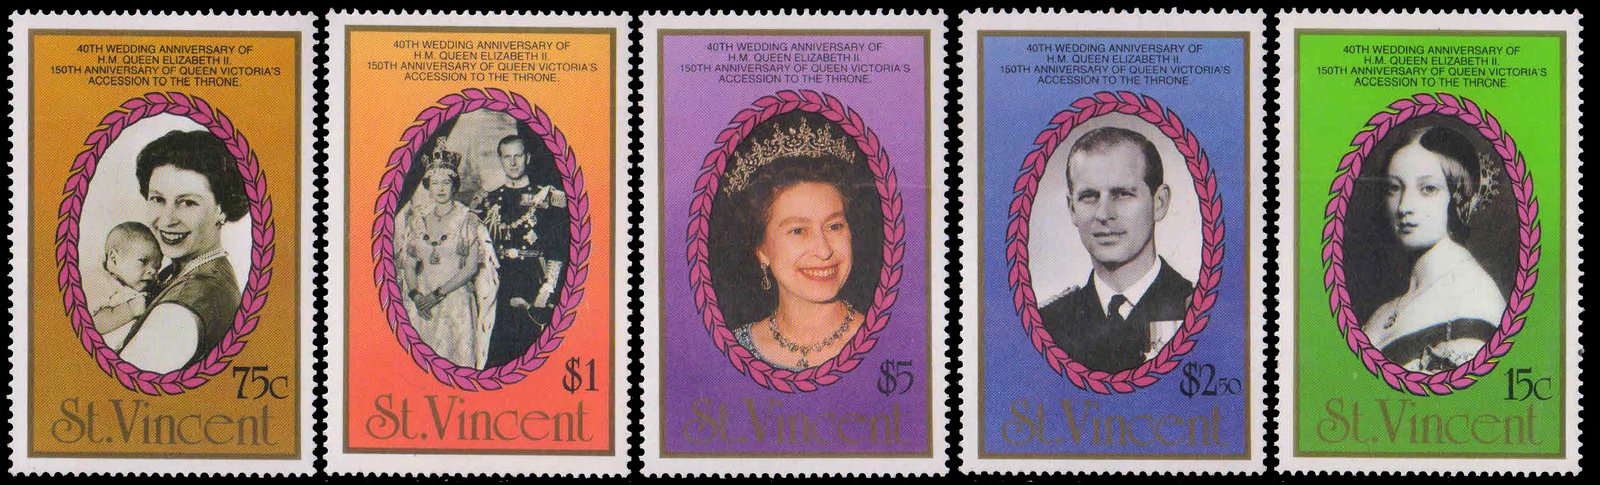 ST. VINCENT 1987-Royal Ruby Wedding, 150th Anniv. of Queen Victoria Accession, Queen Elizabeth, Set of 5, MNH, S.G. 1079-83